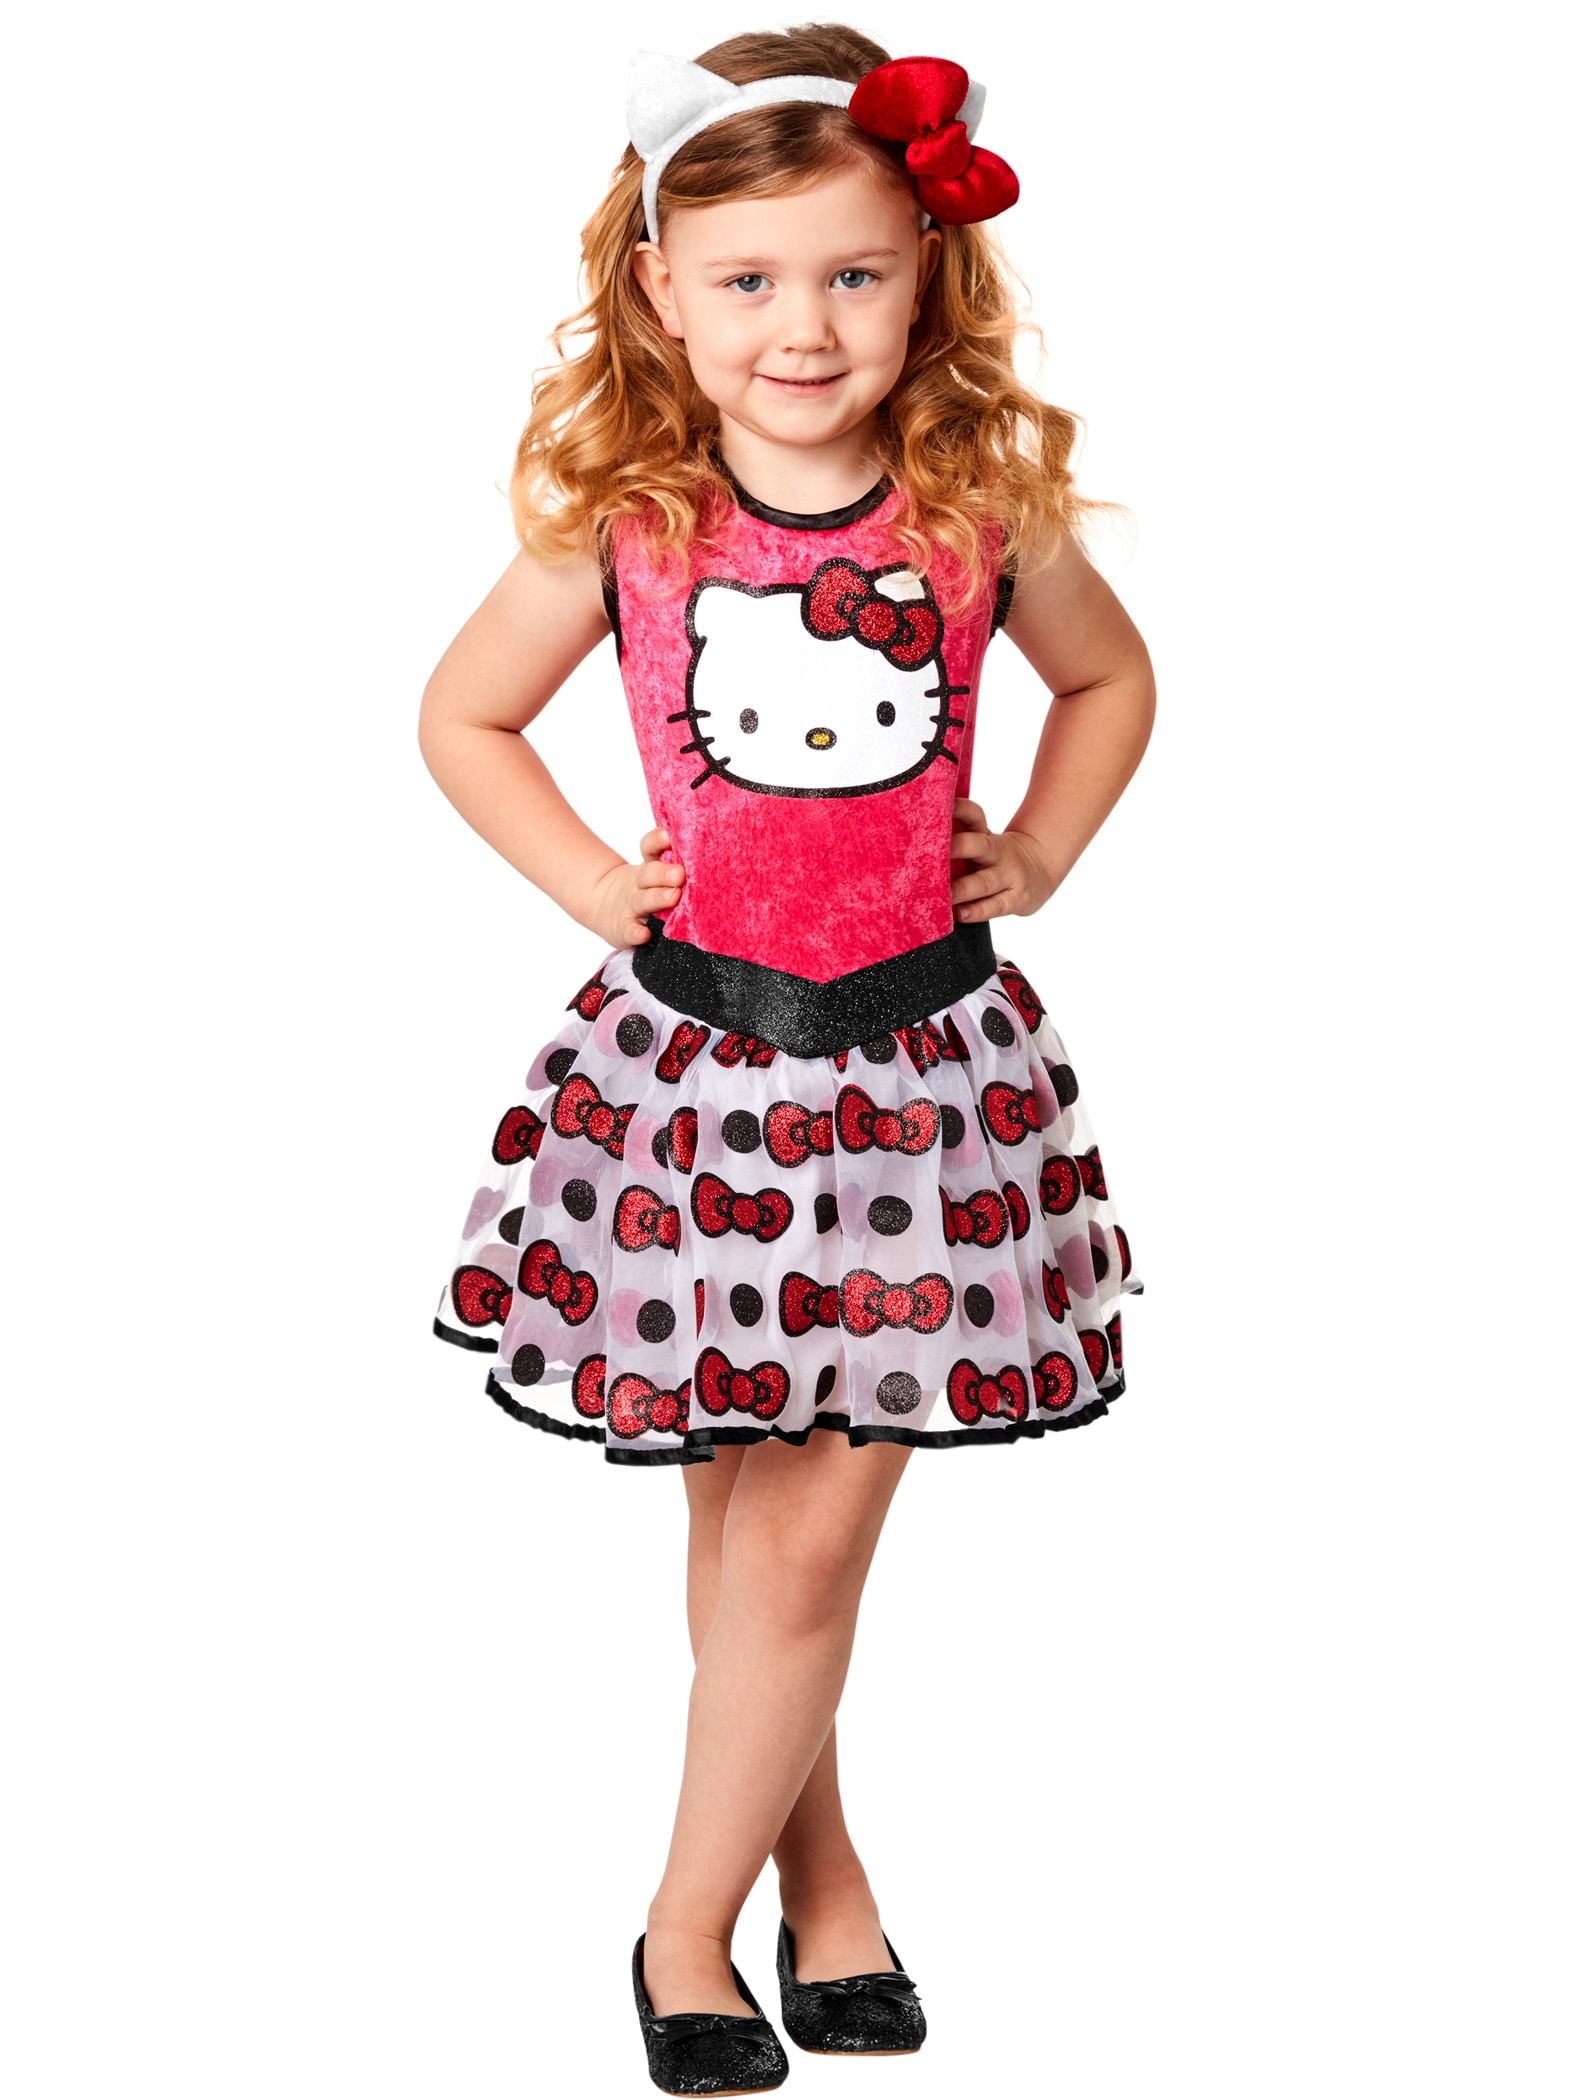 How Hello Kitty Harnessed The Power Of Cute To Build A Multi